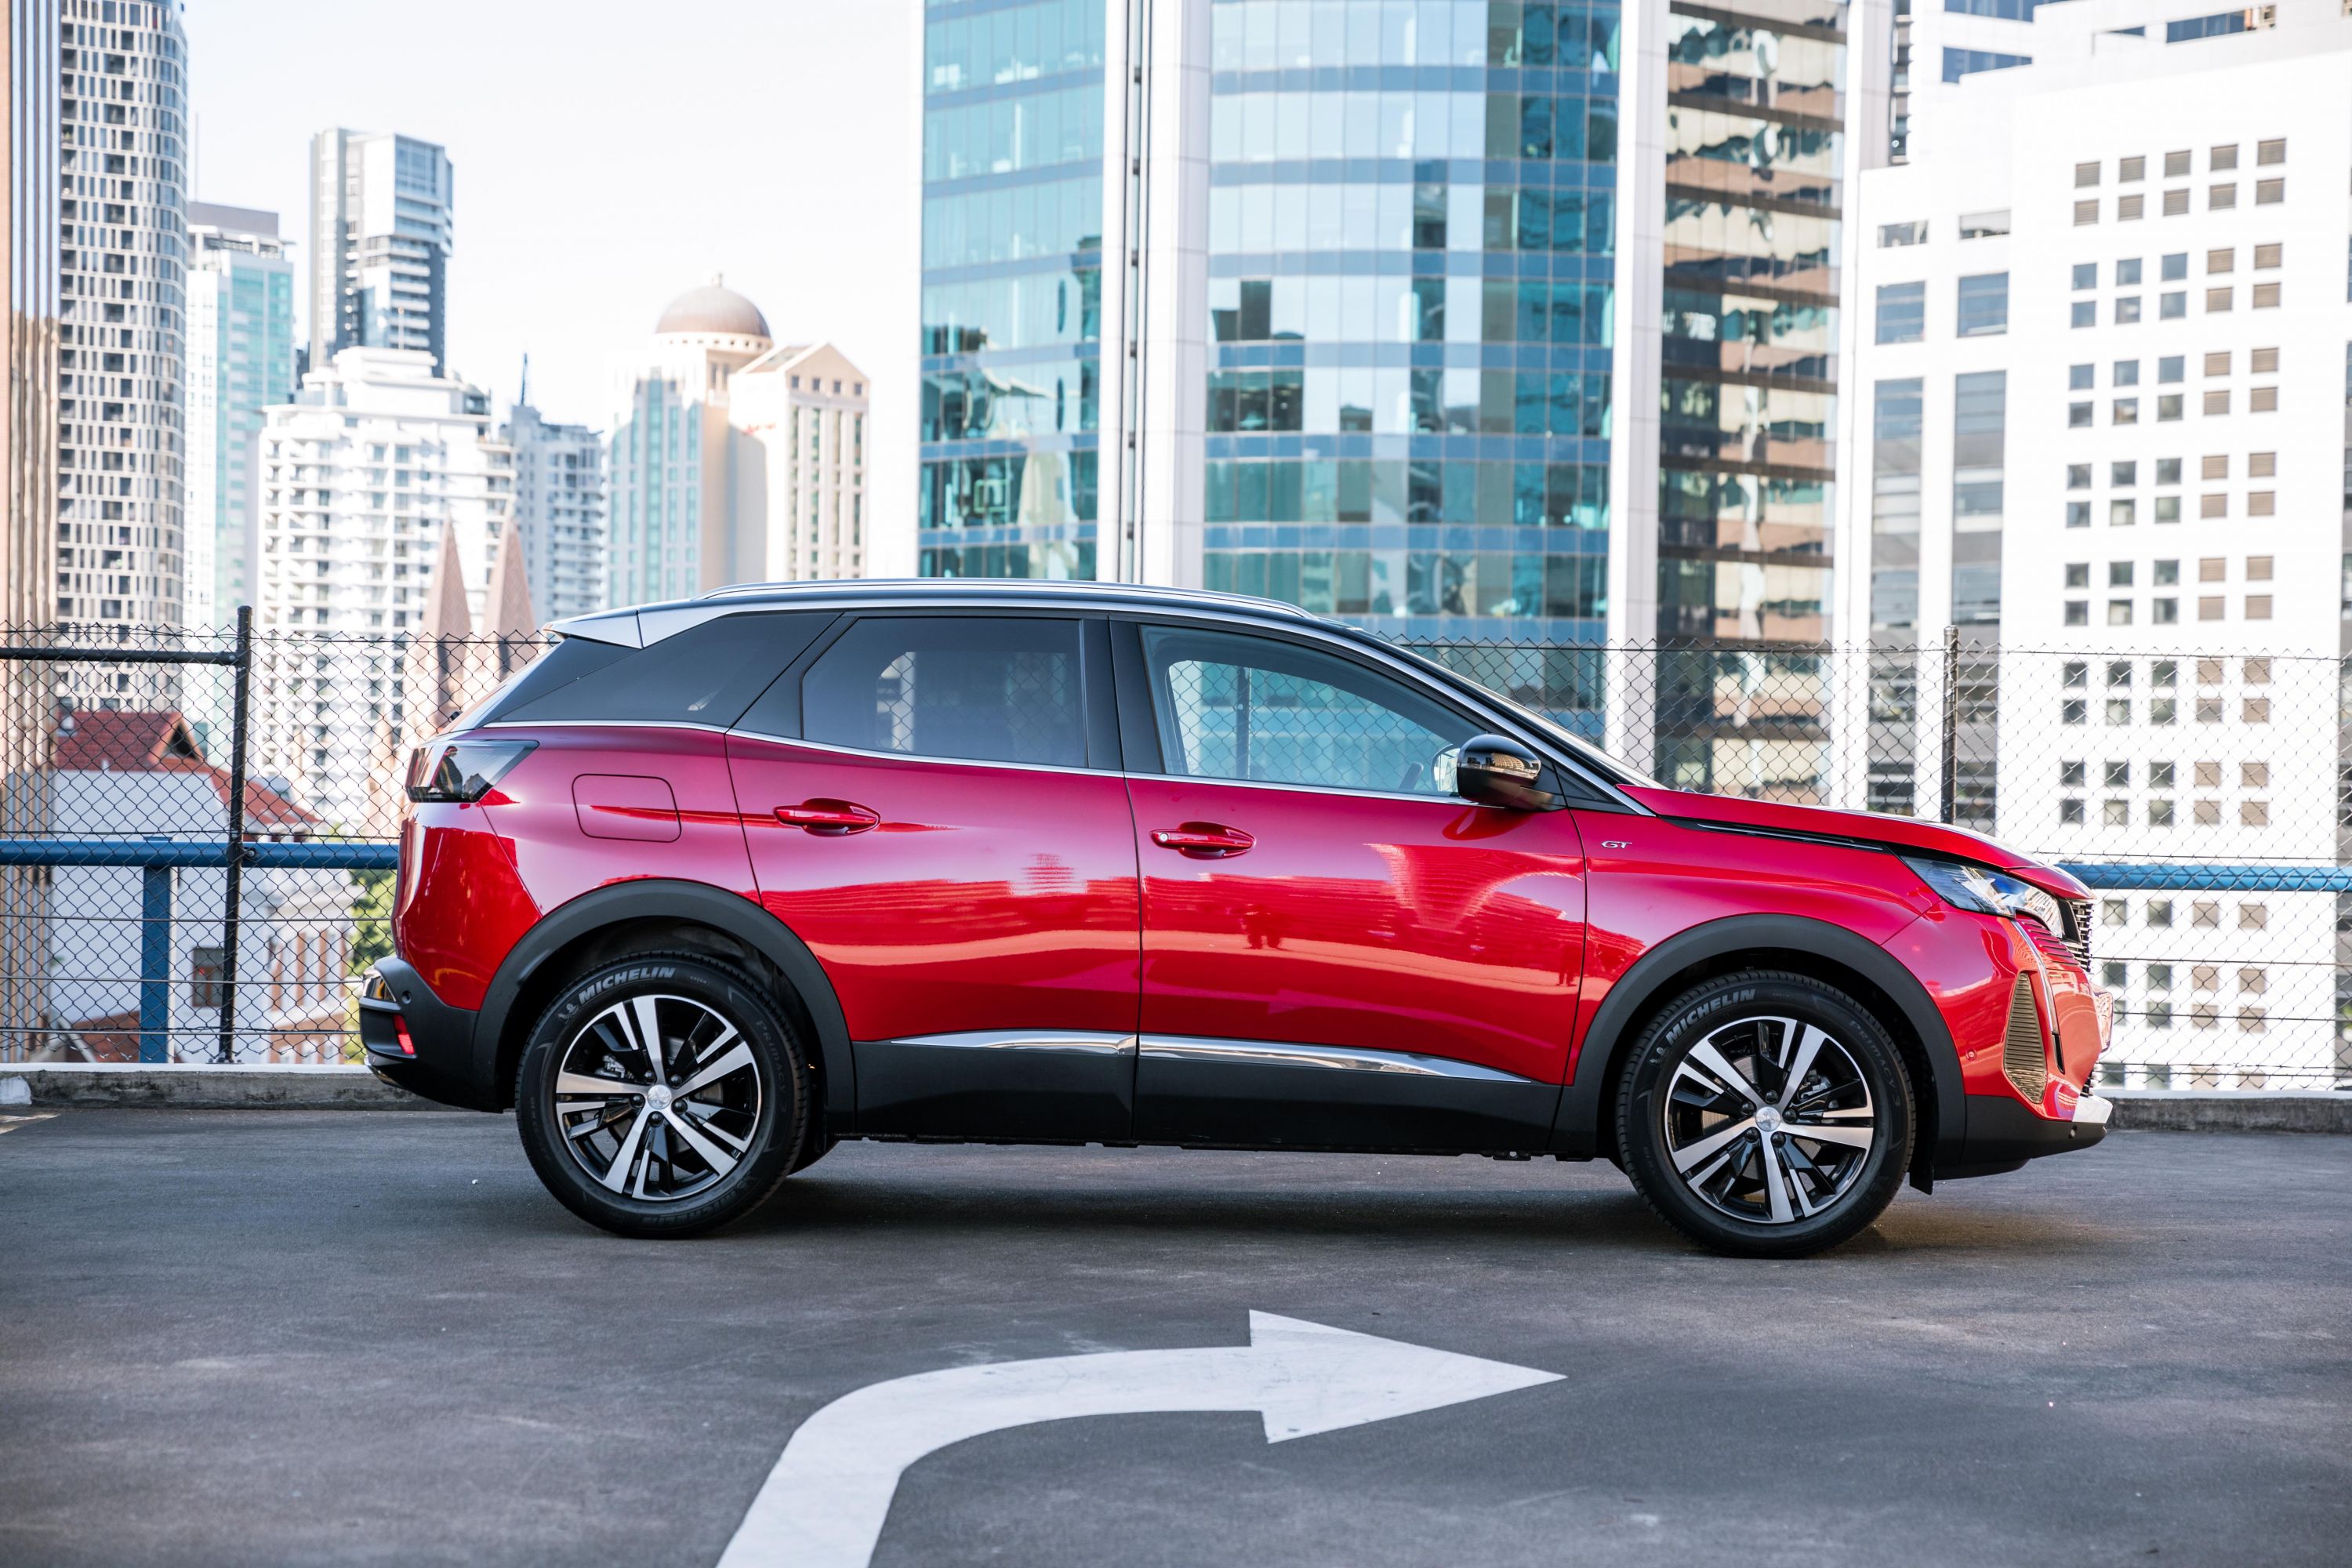 2021 Peugeot 2008 in-depth review - substance as well as style? 